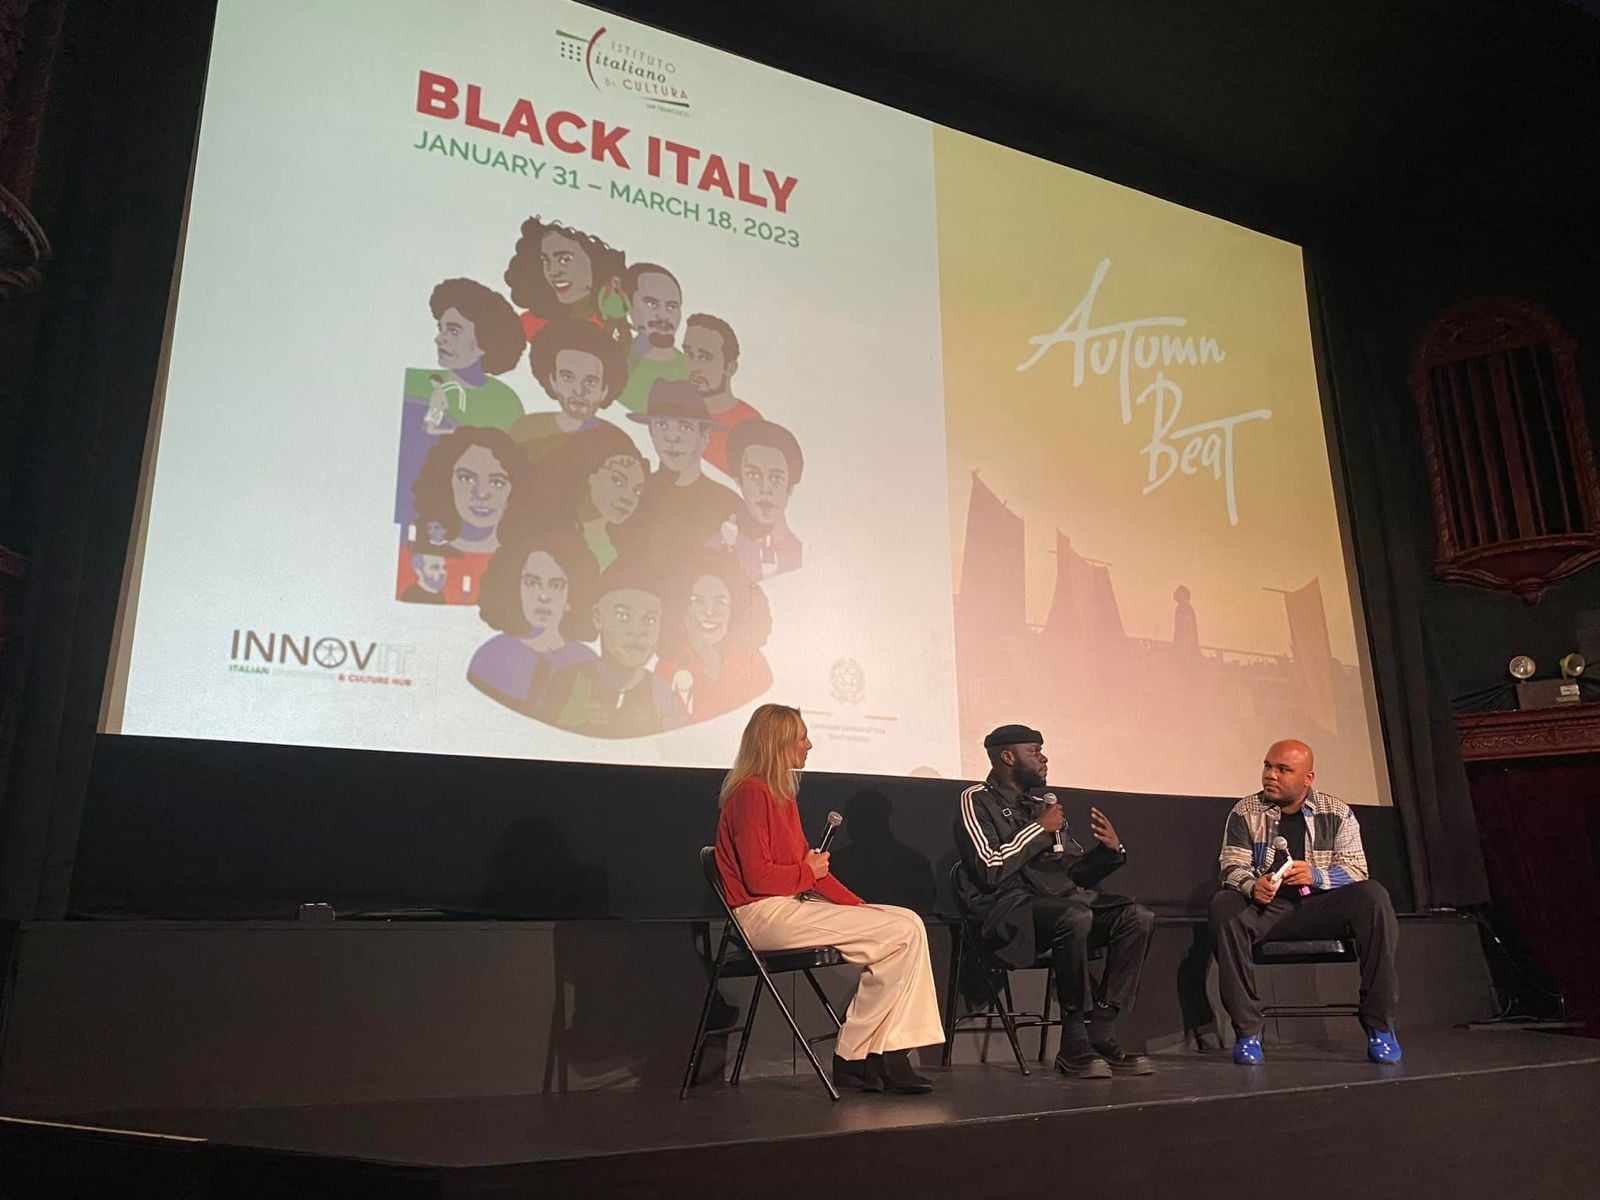 Panelists on stage speaking with powerpoint reading "Black Italy" behind them